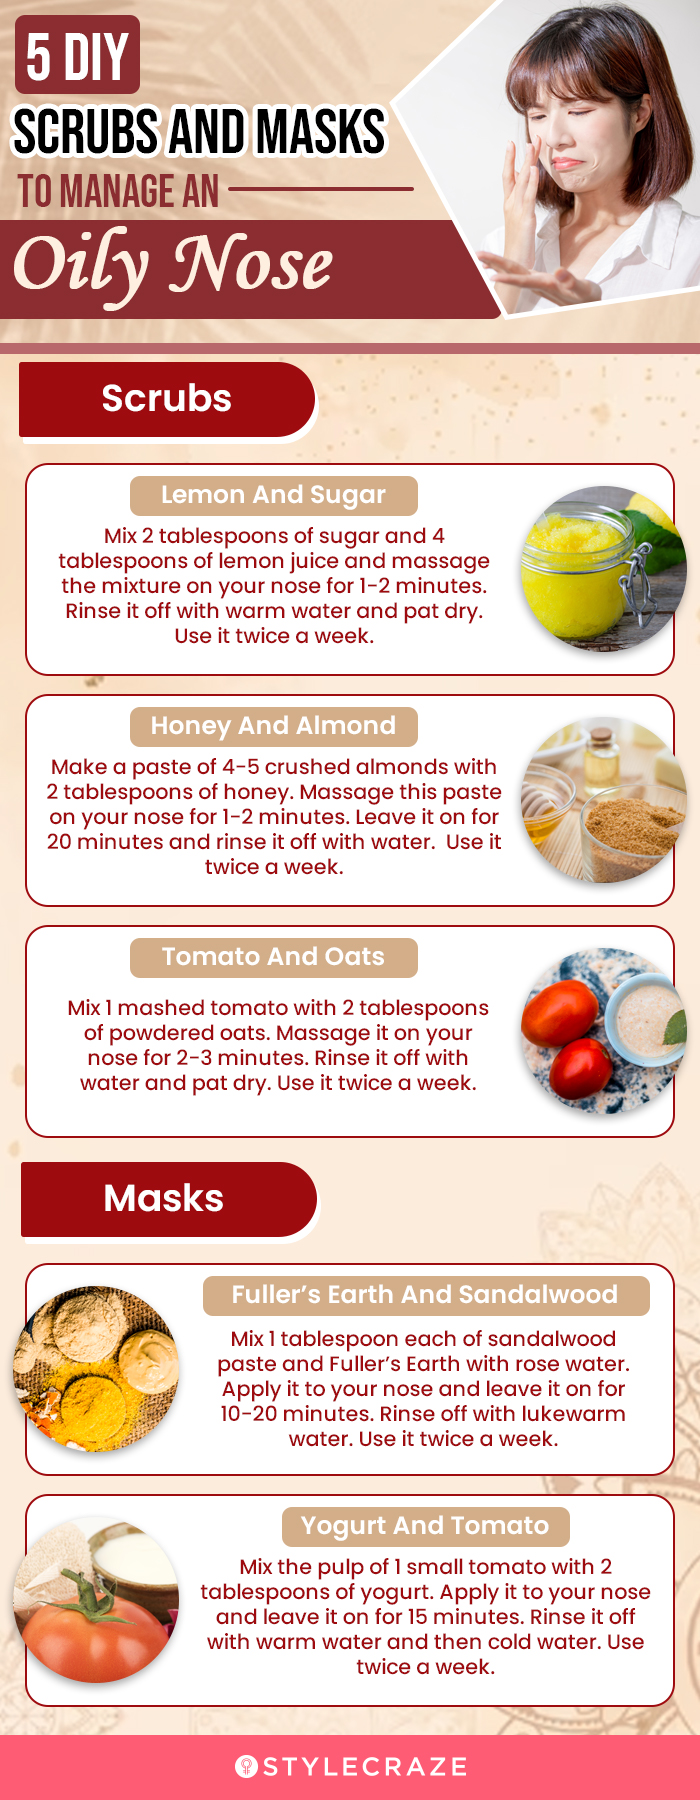 5 diy scrubs and masks to manage an oily nose (infographic)